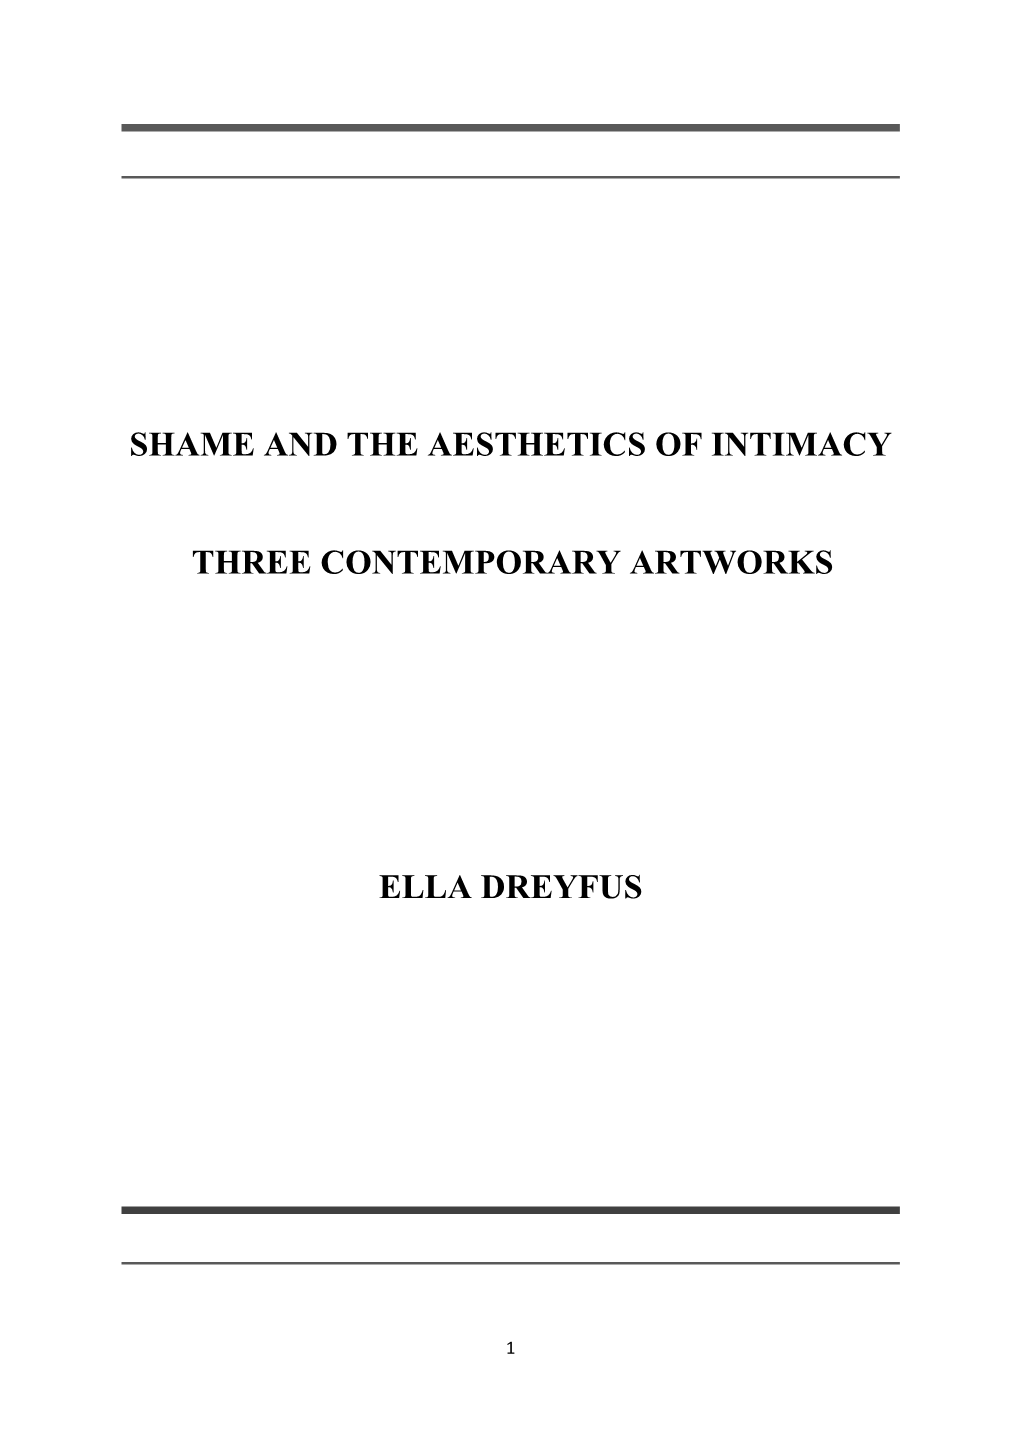 Shame and the Aesthetics of Intimacy Three